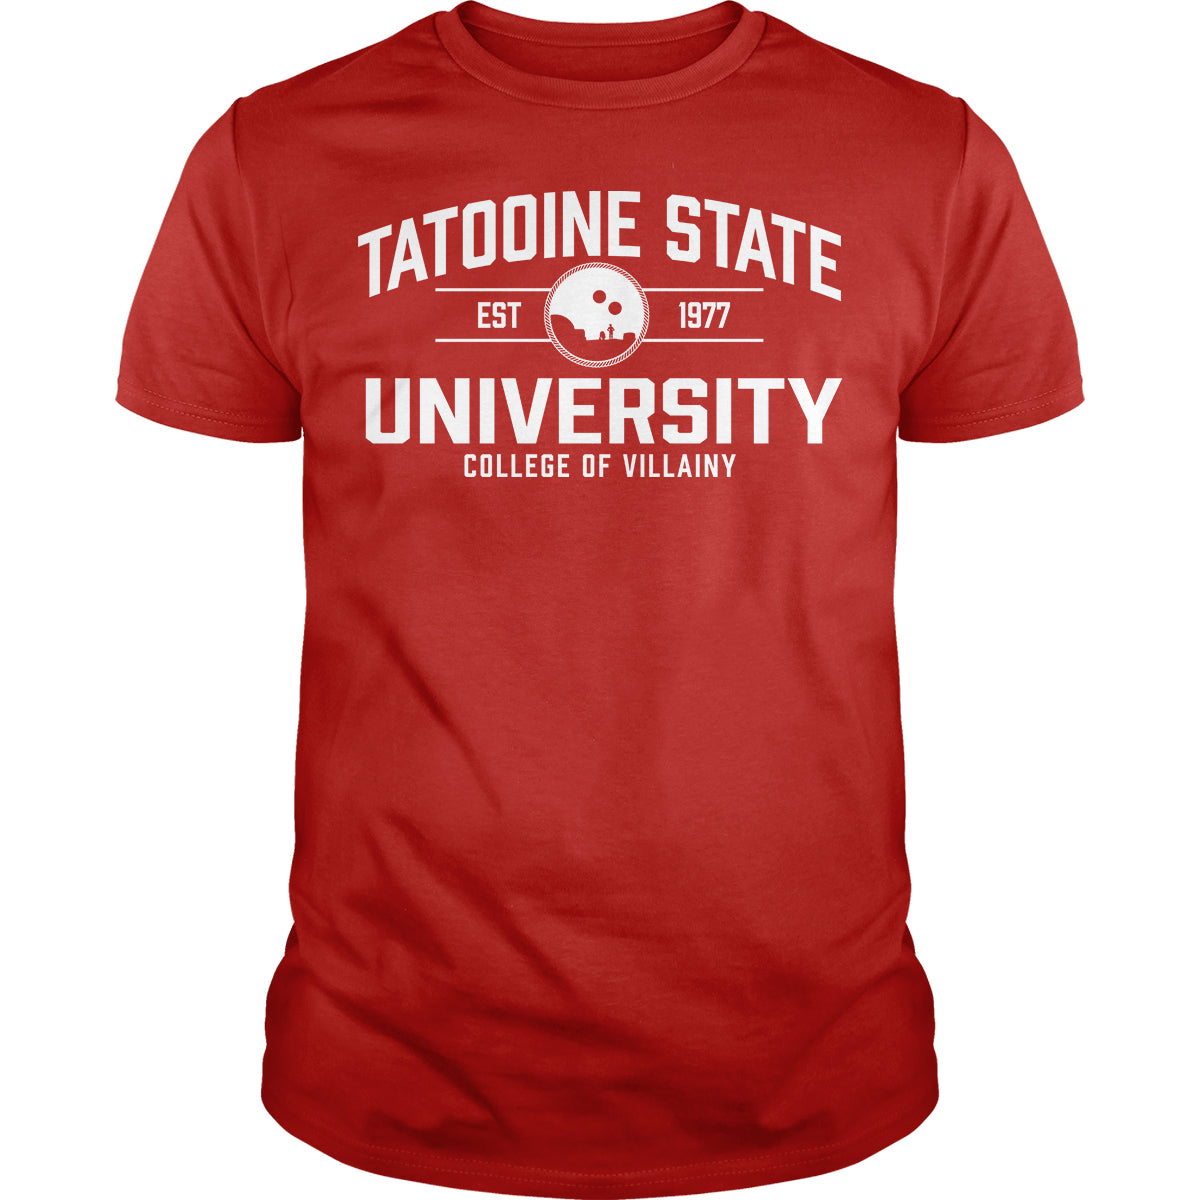 Tattoine State College of Villainy